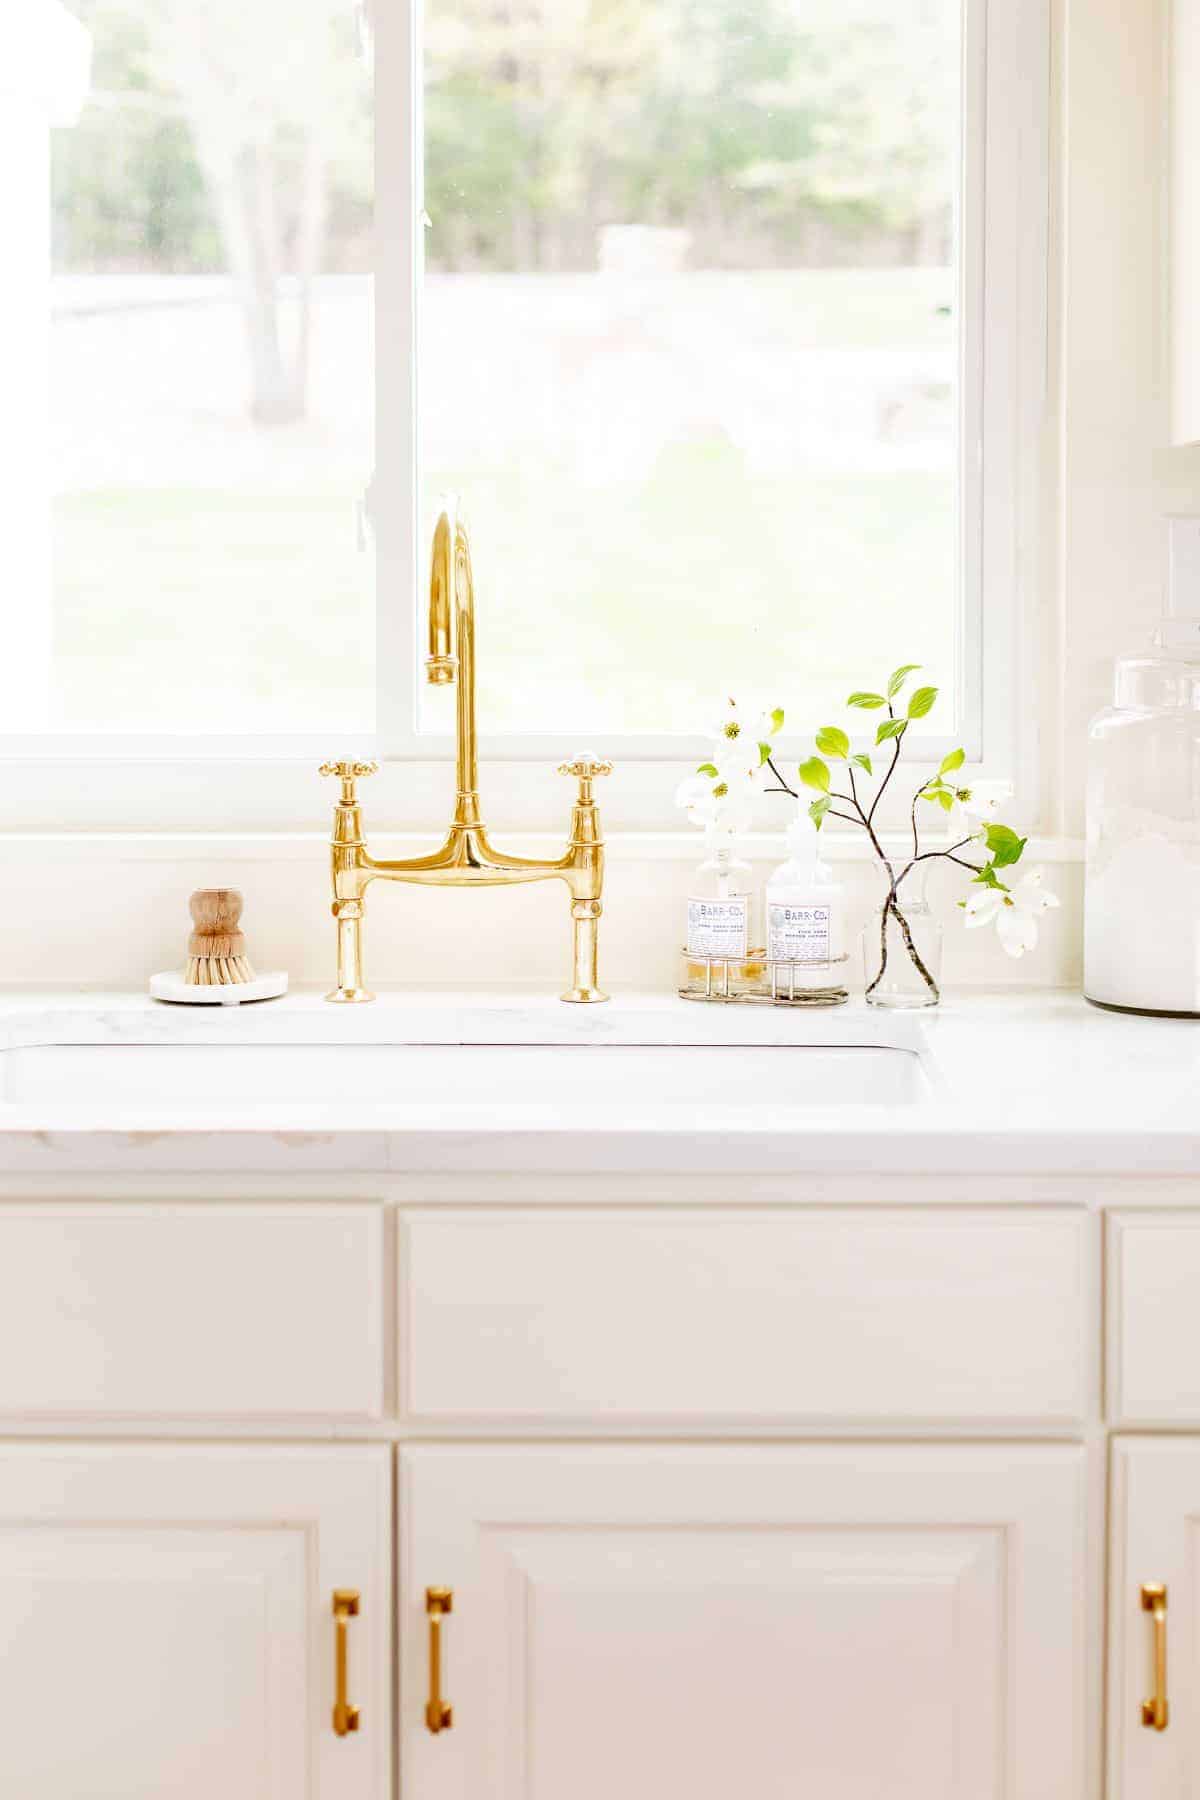 A white kitchen sink area with a brass bridge faucet, window over the sink and vase of flowers to the side.